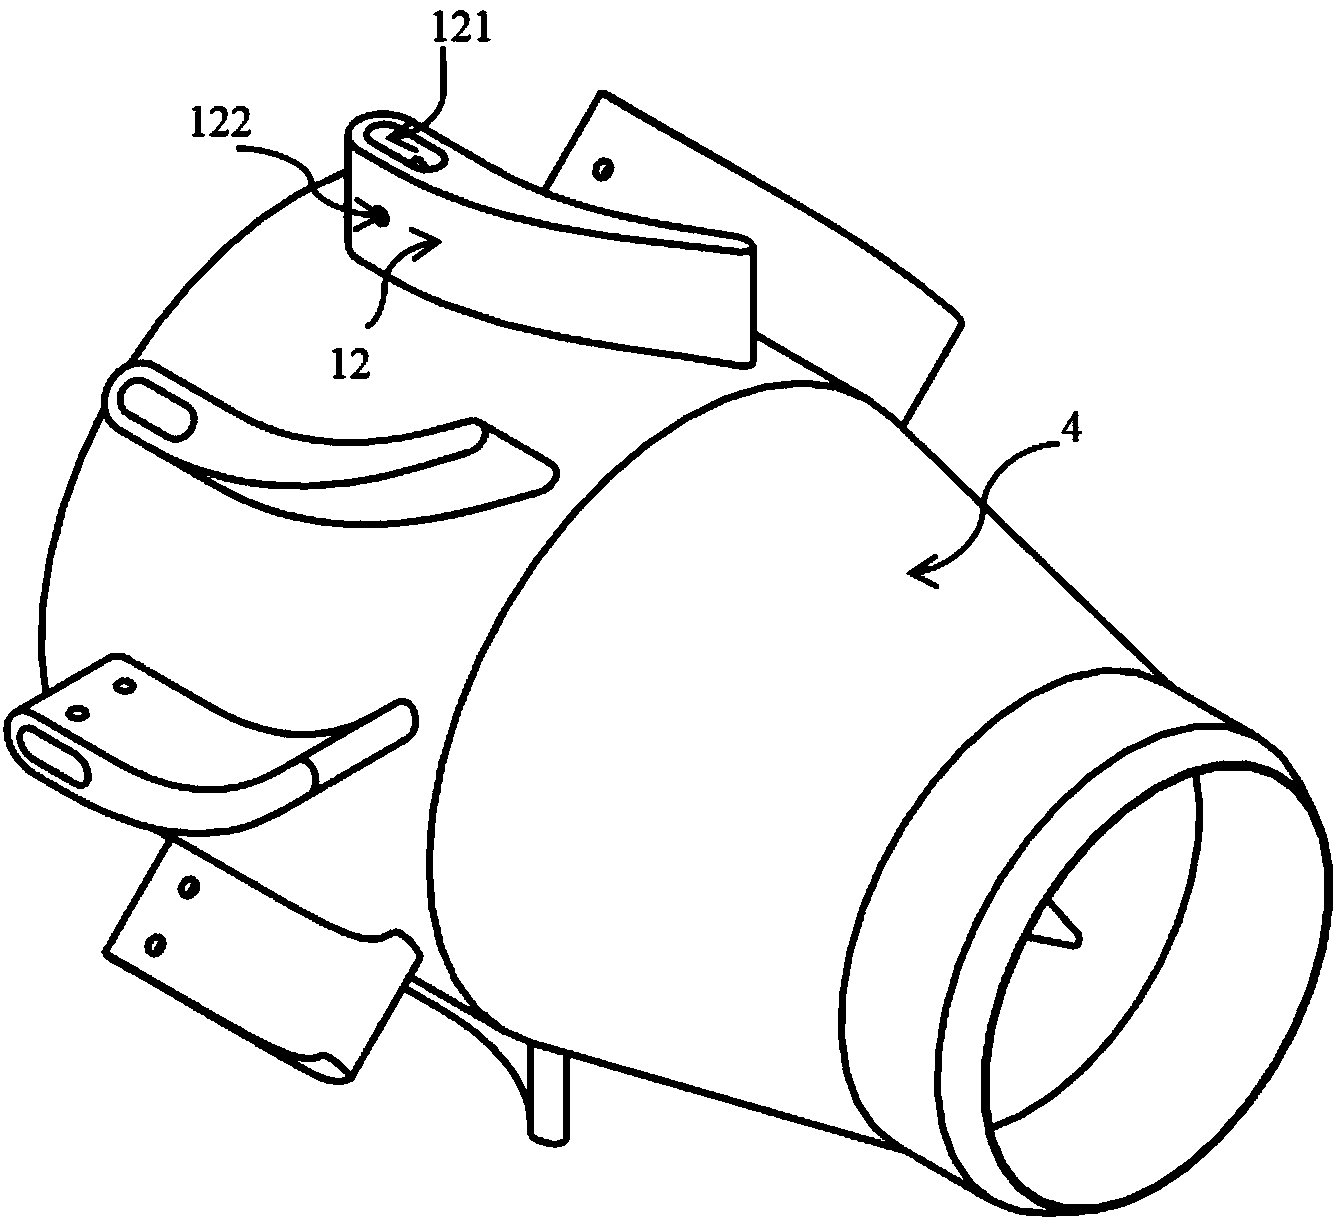 Premixing nozzle of gas turbine combustion chamber